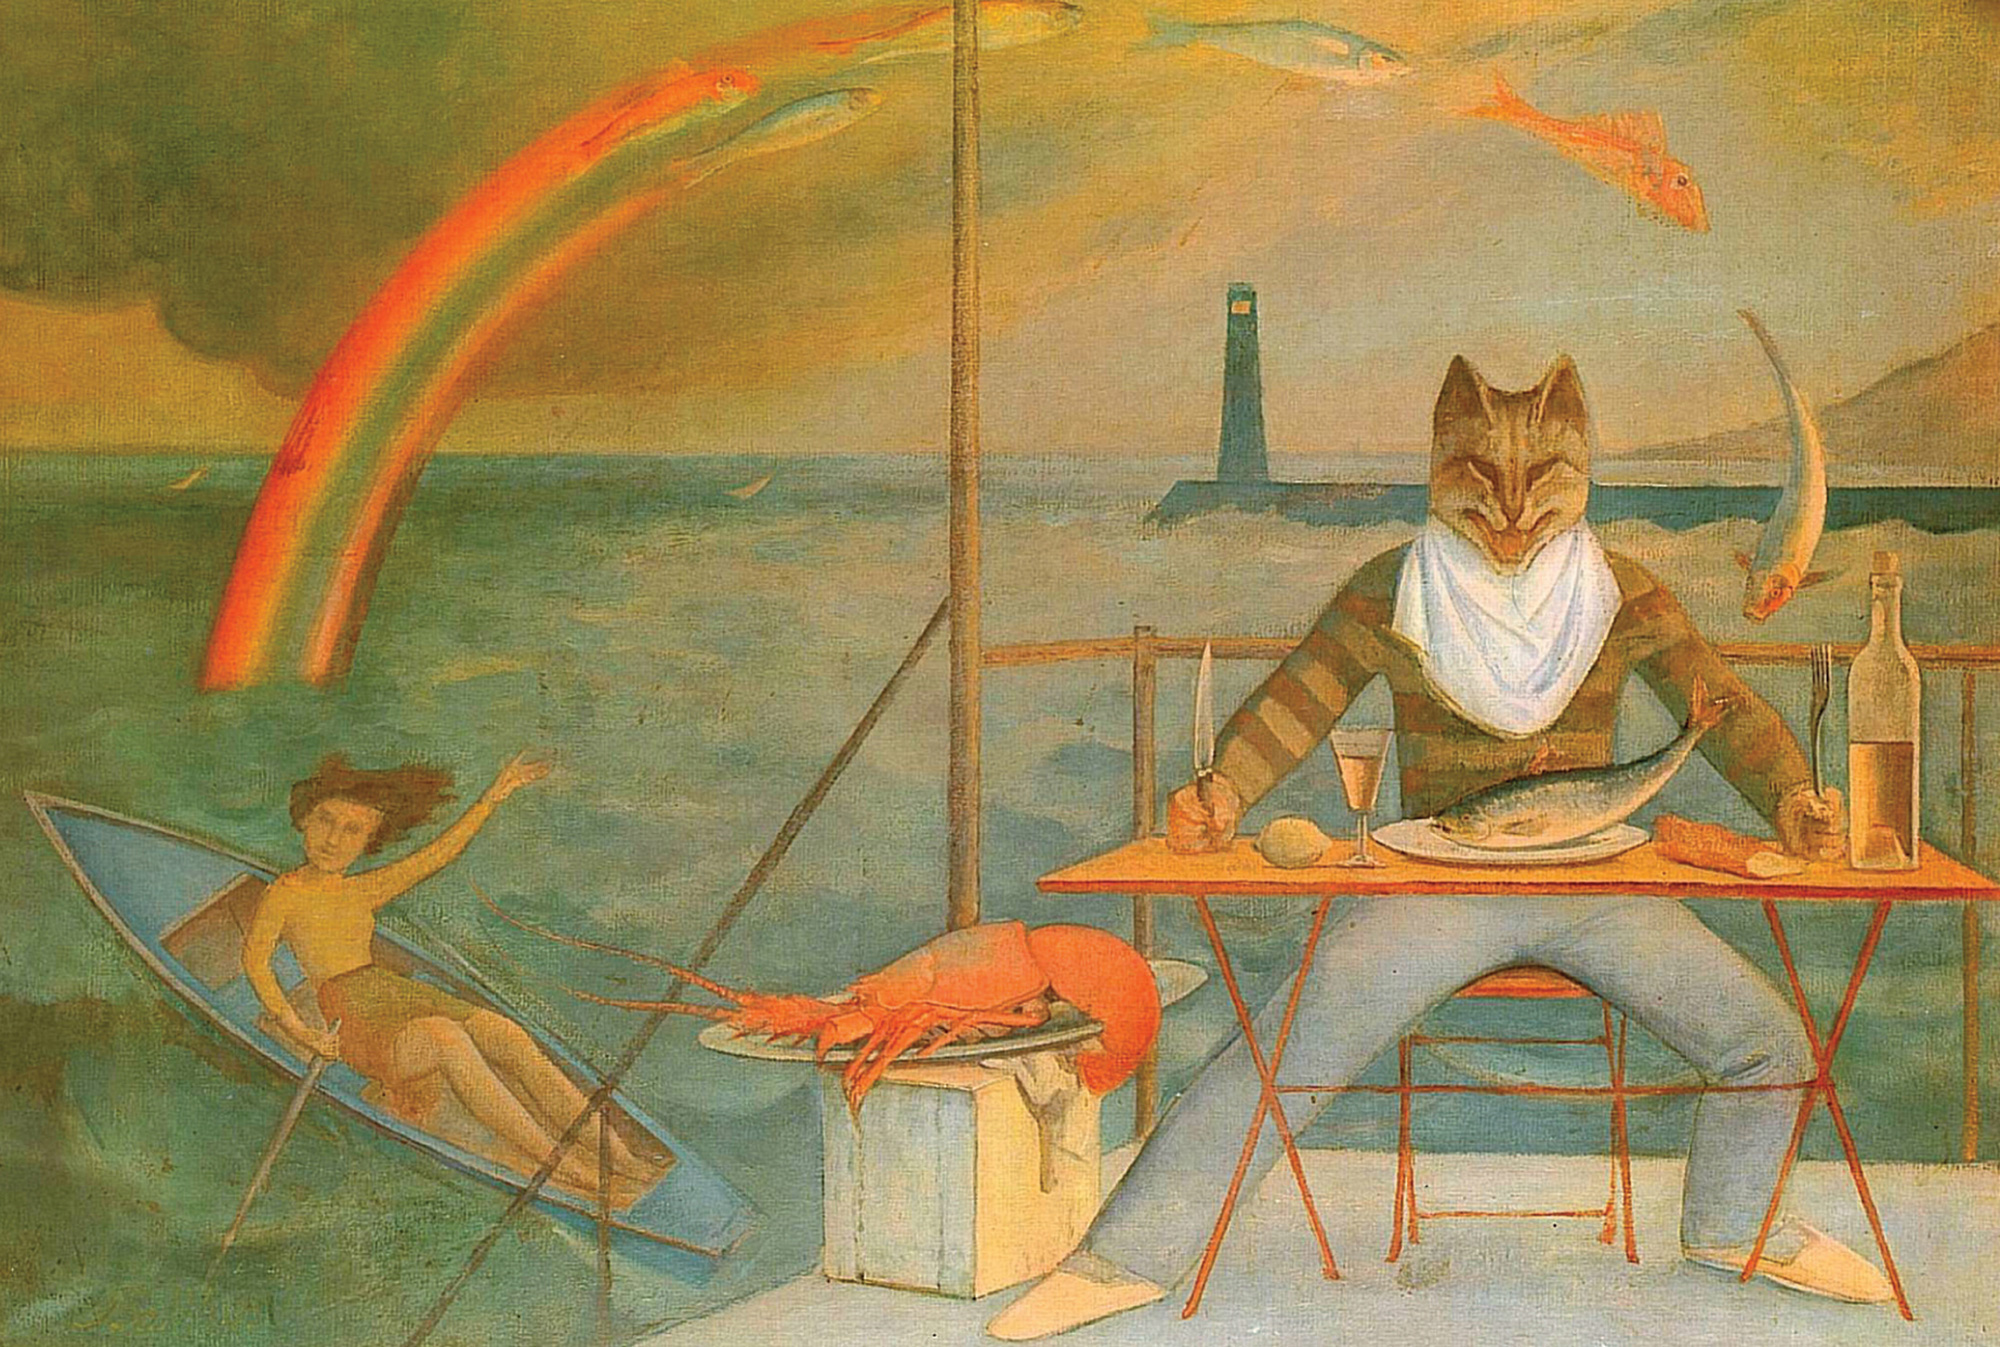 Balthus’s nineteen forty-nine painting titled “The Cat of La Méditerranée” depicting a cat-headed man feasting at a table, while fish leap out of the ocean onto his plate. The painting was made for “La Méditerranée,” a Paris restaurant frequented by the artist. 